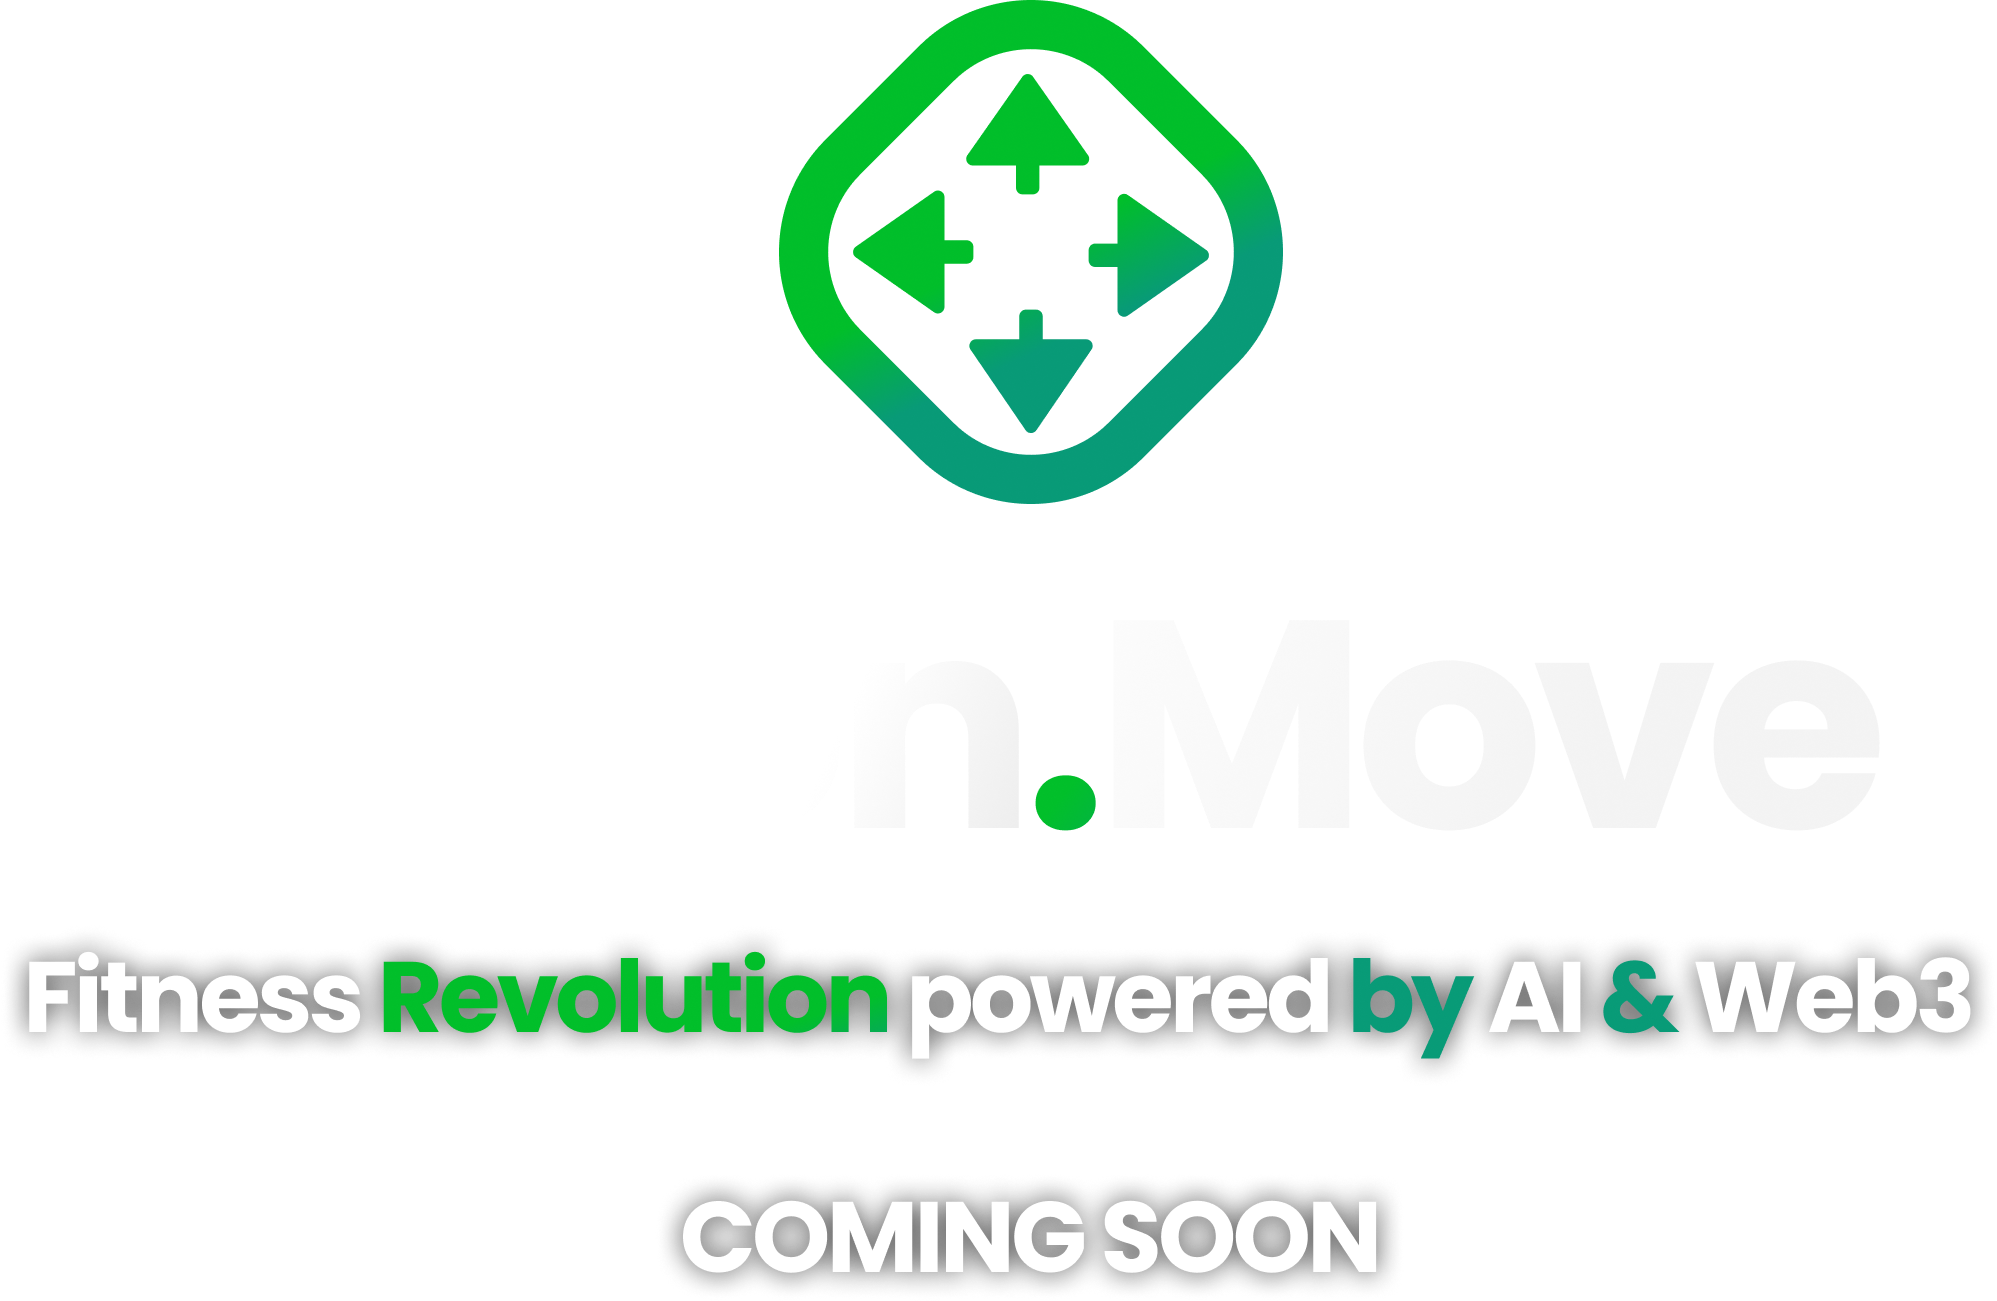 VisionMove - Fitness Revolution powered by AI & Web3. Coming Soon!